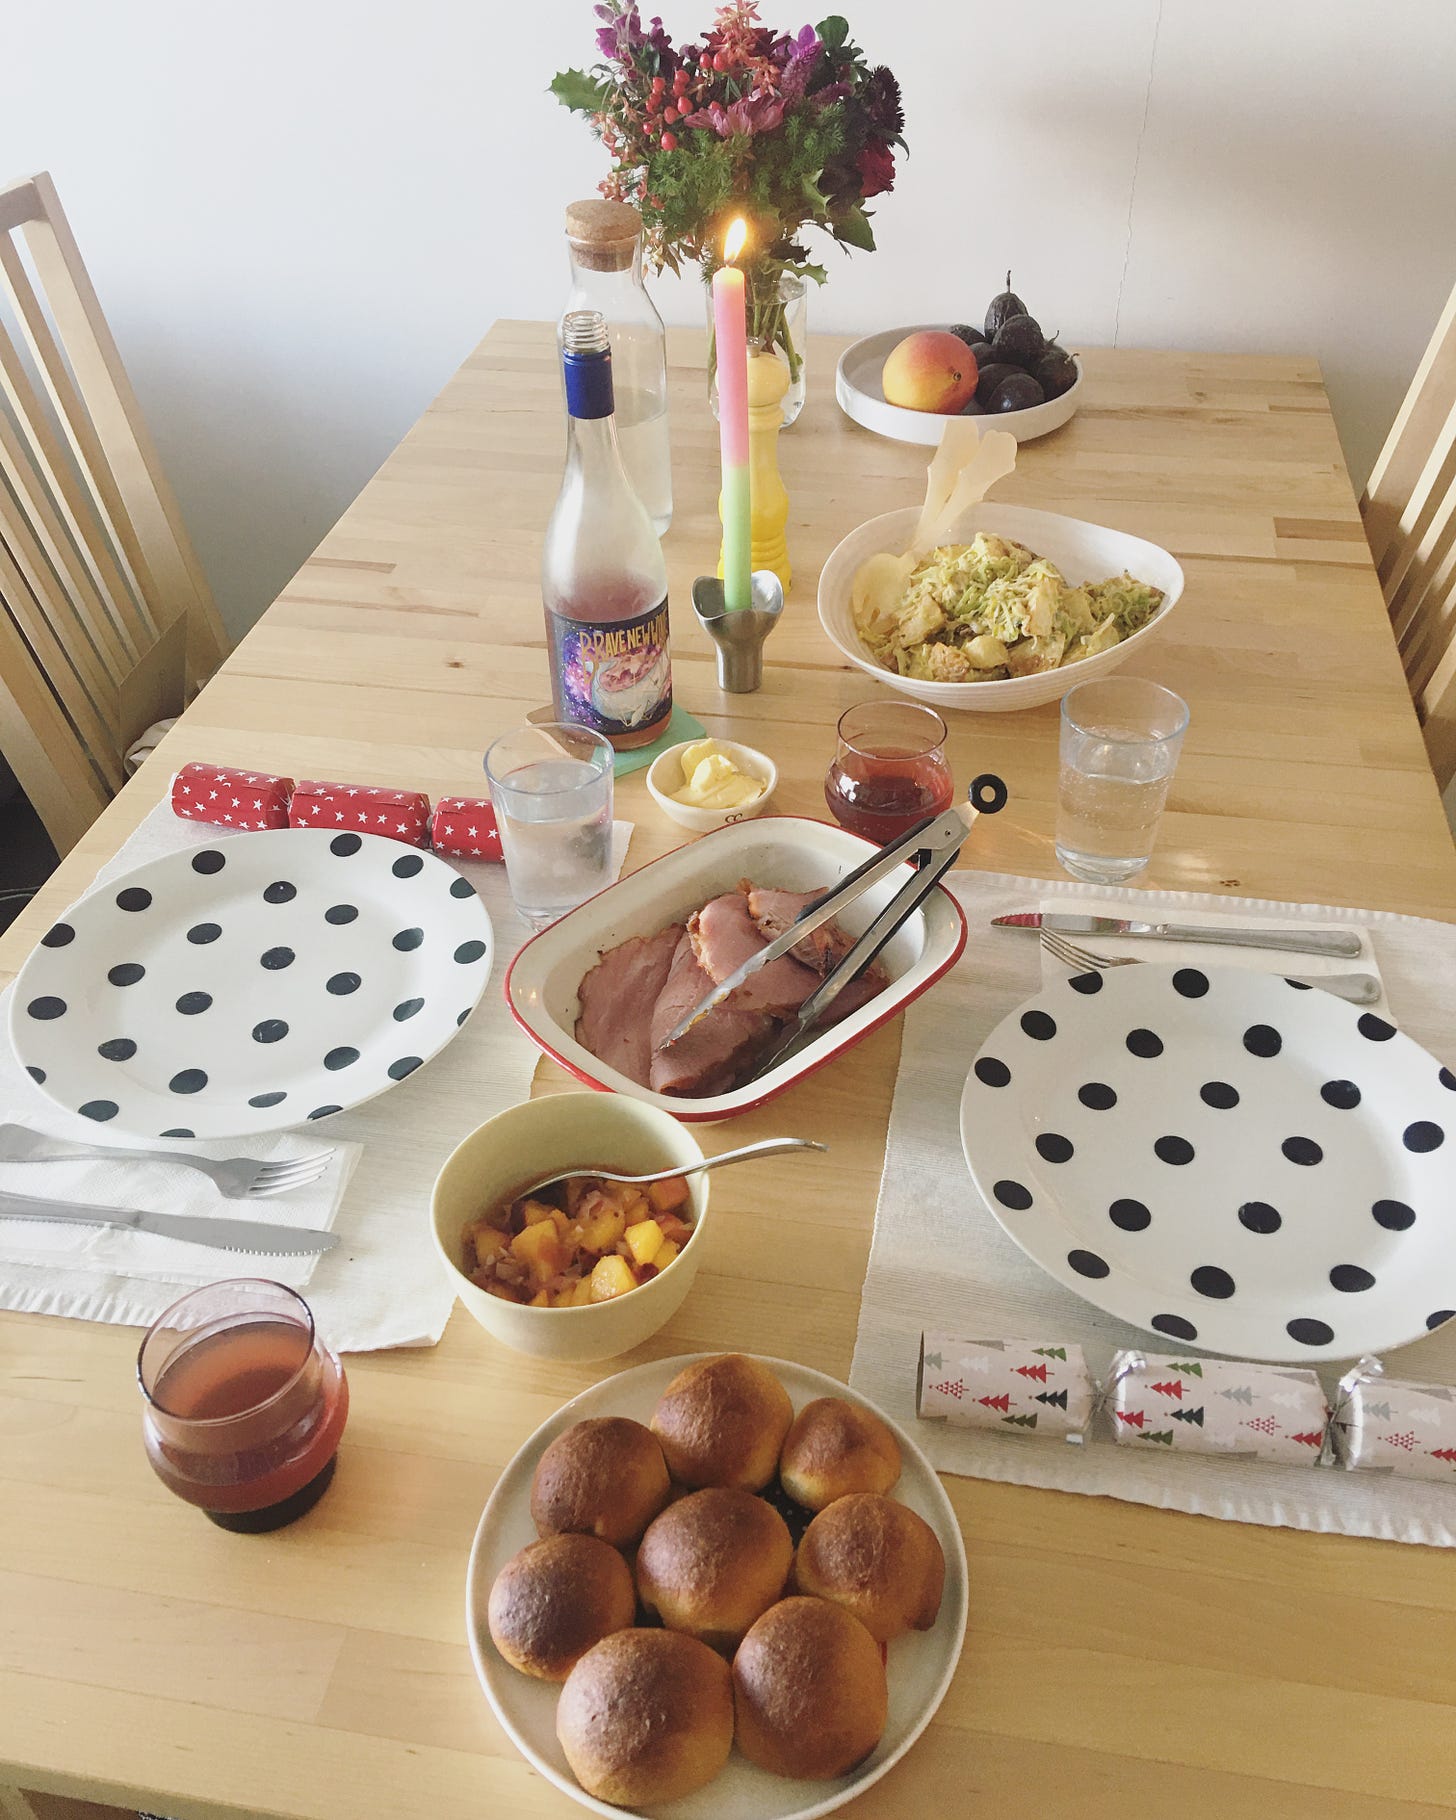 Dining table with Christmas lunch meal including potato salad, dinner rolls, ham and peach relish